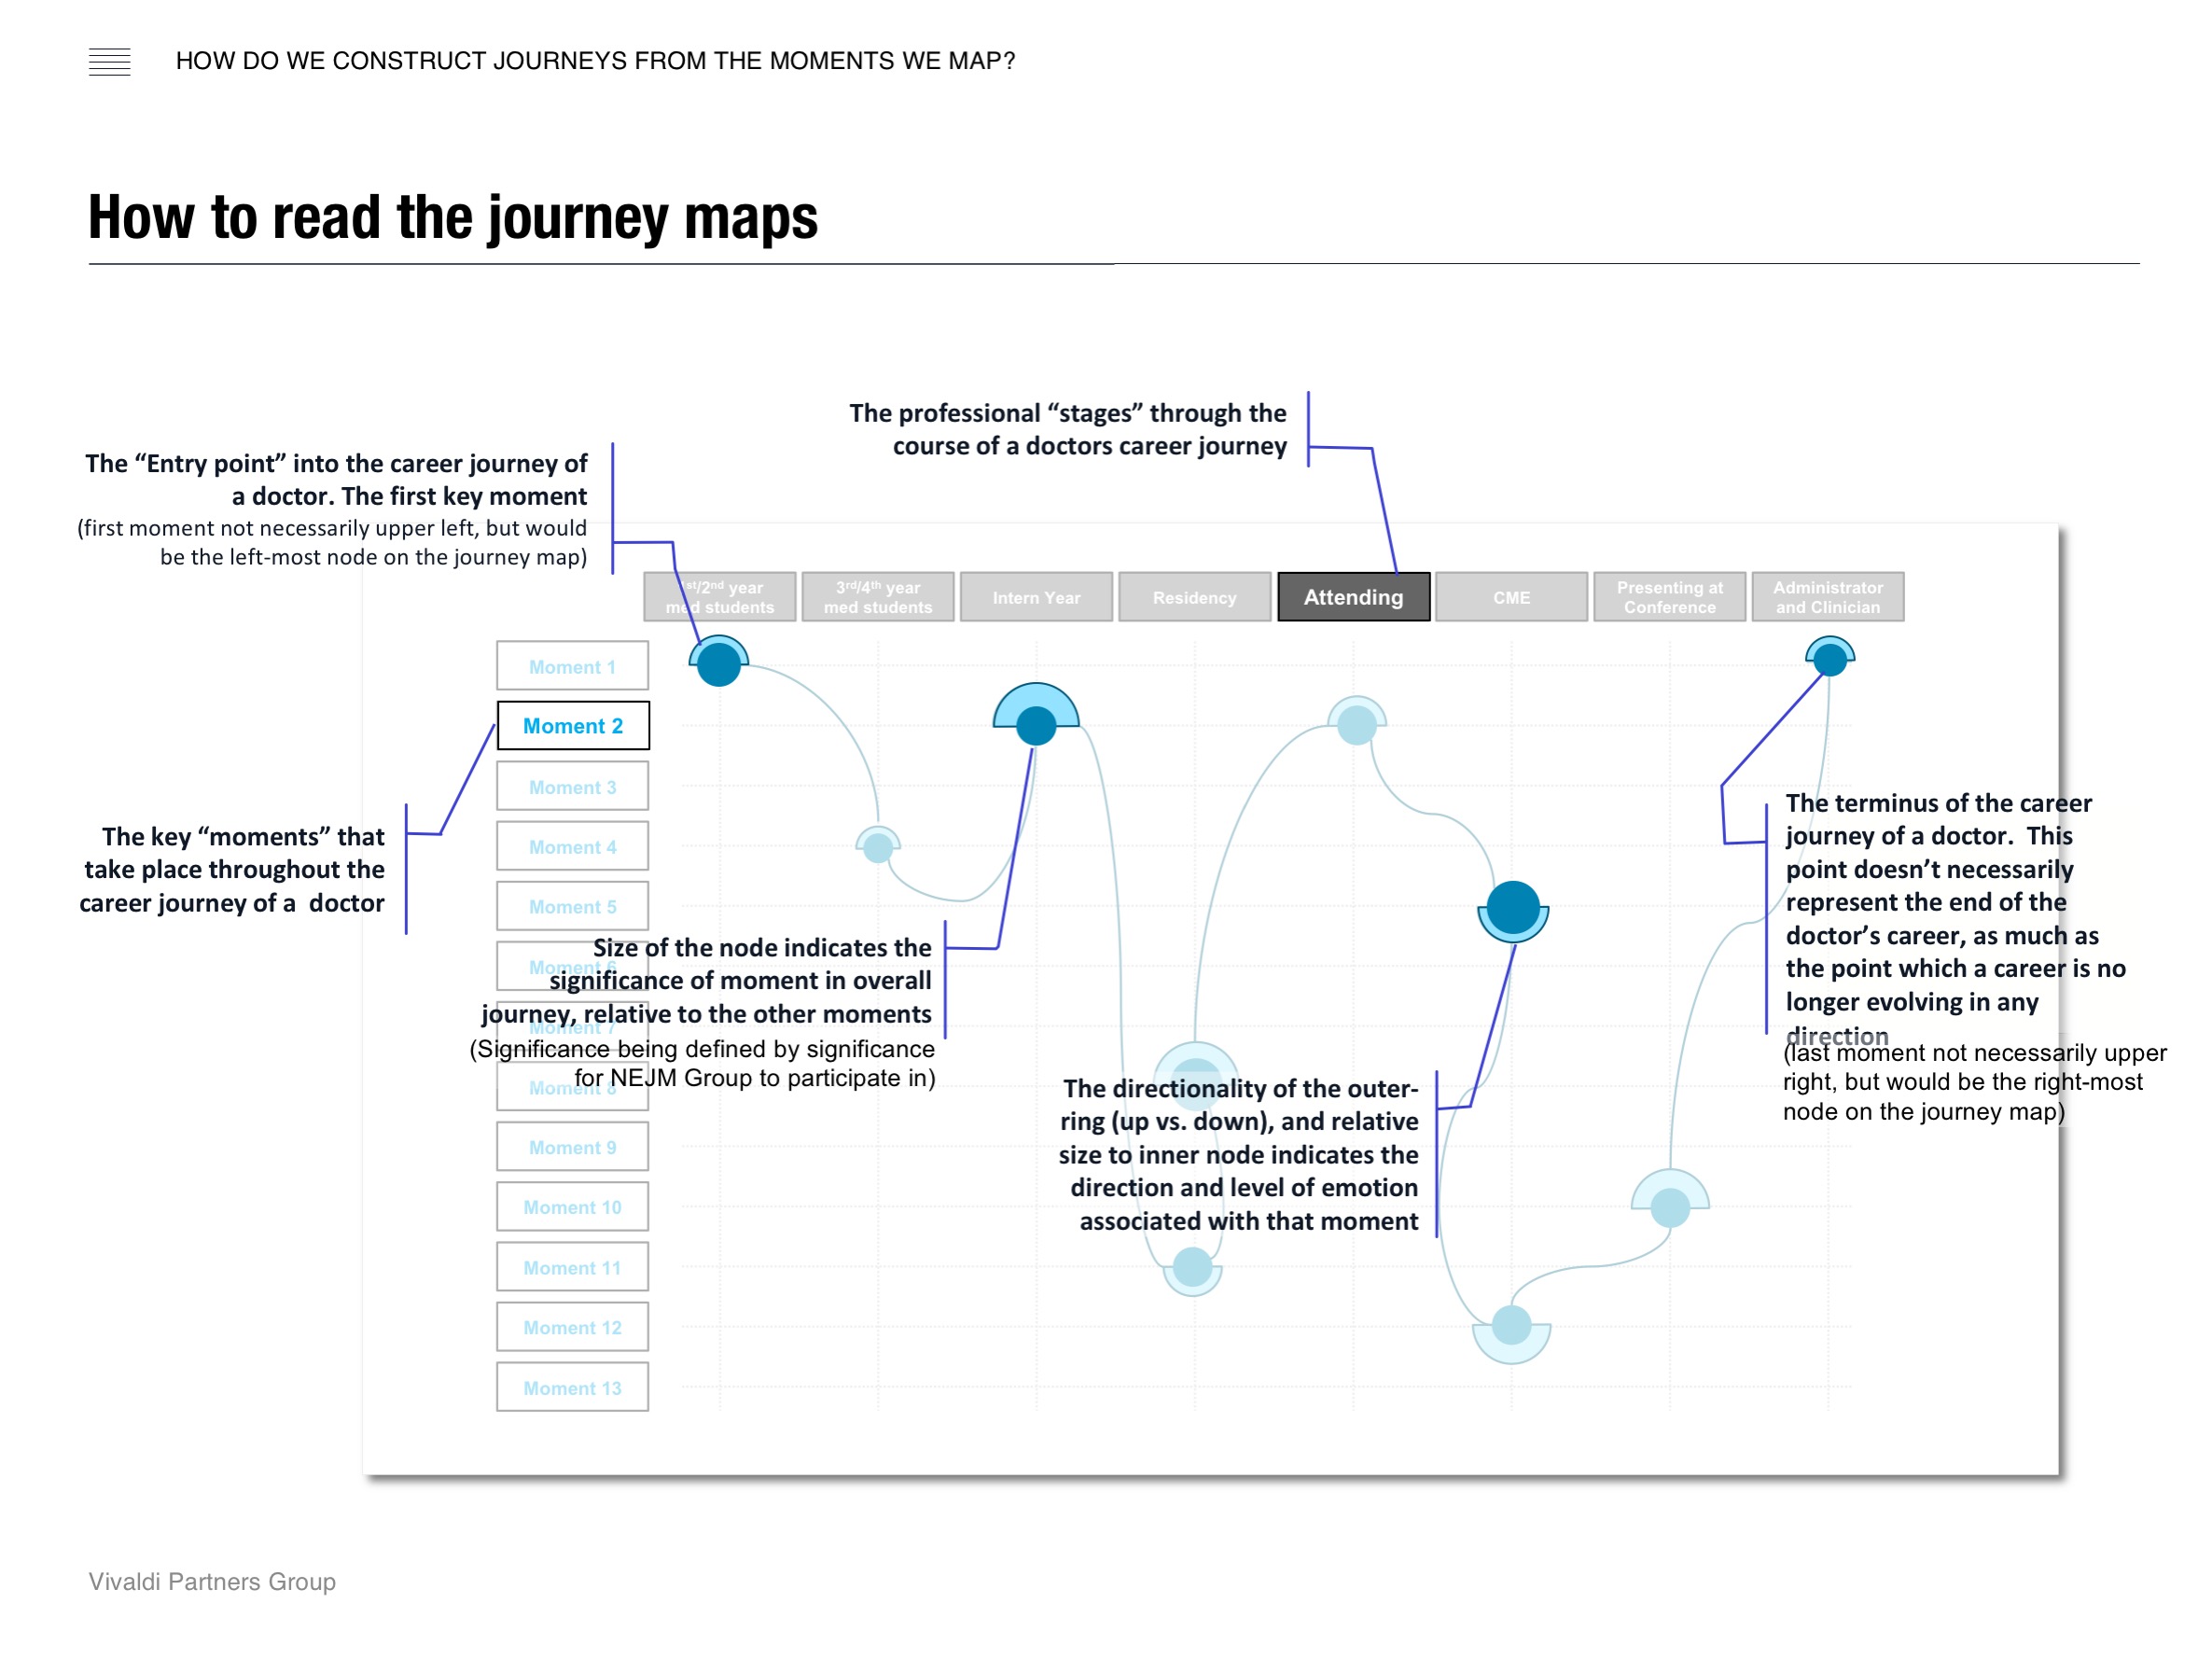 How to read the journey maps